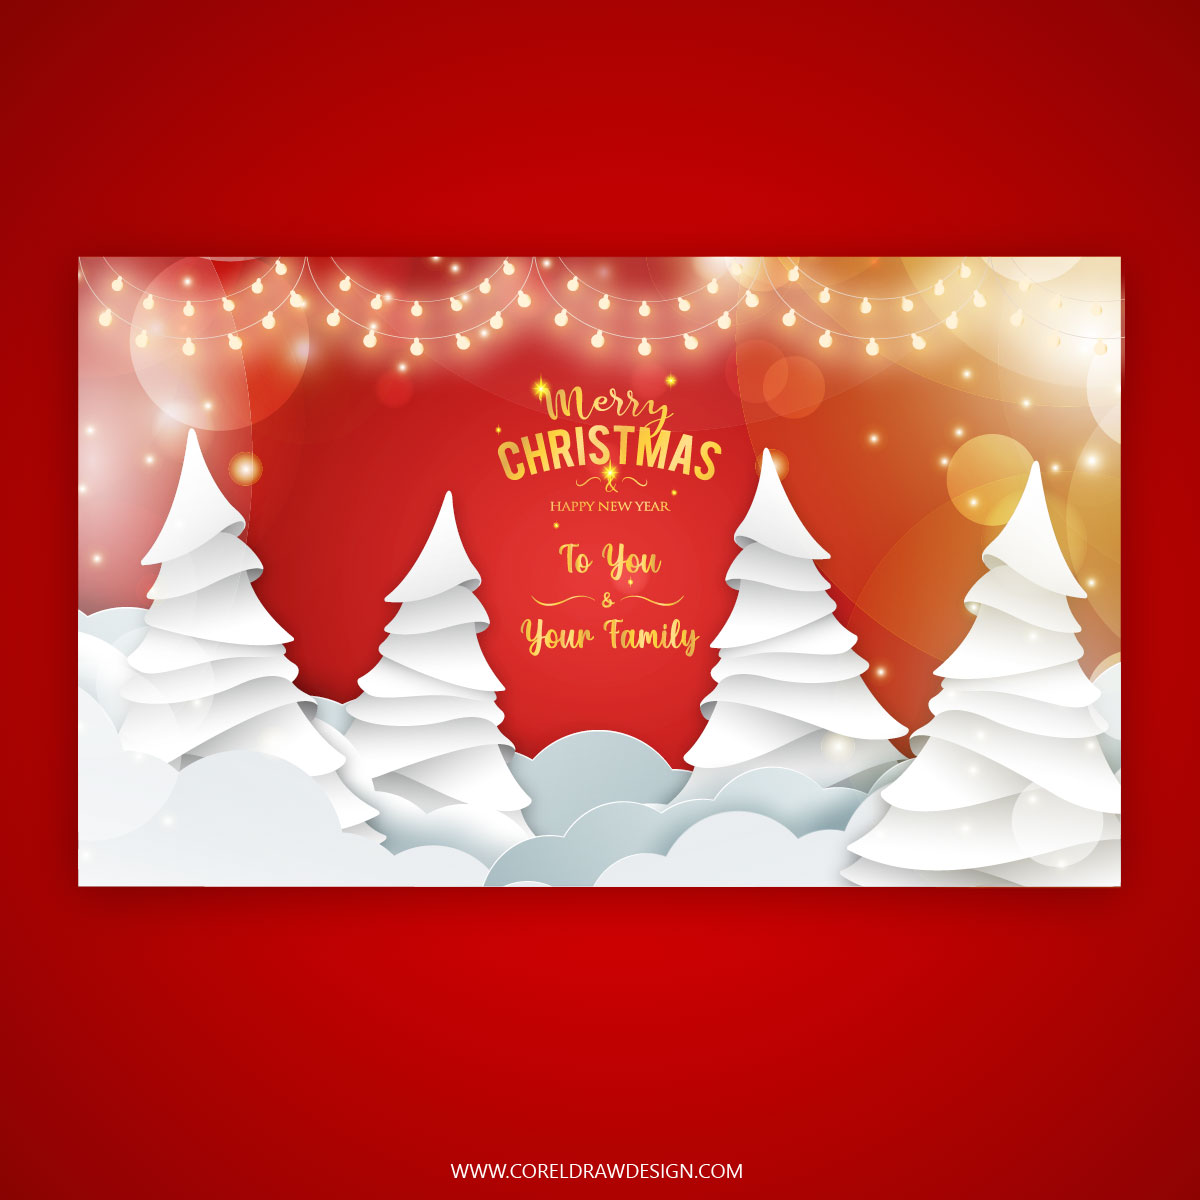 Download Trending Christmas Wishes Card With String Light and Tree ...